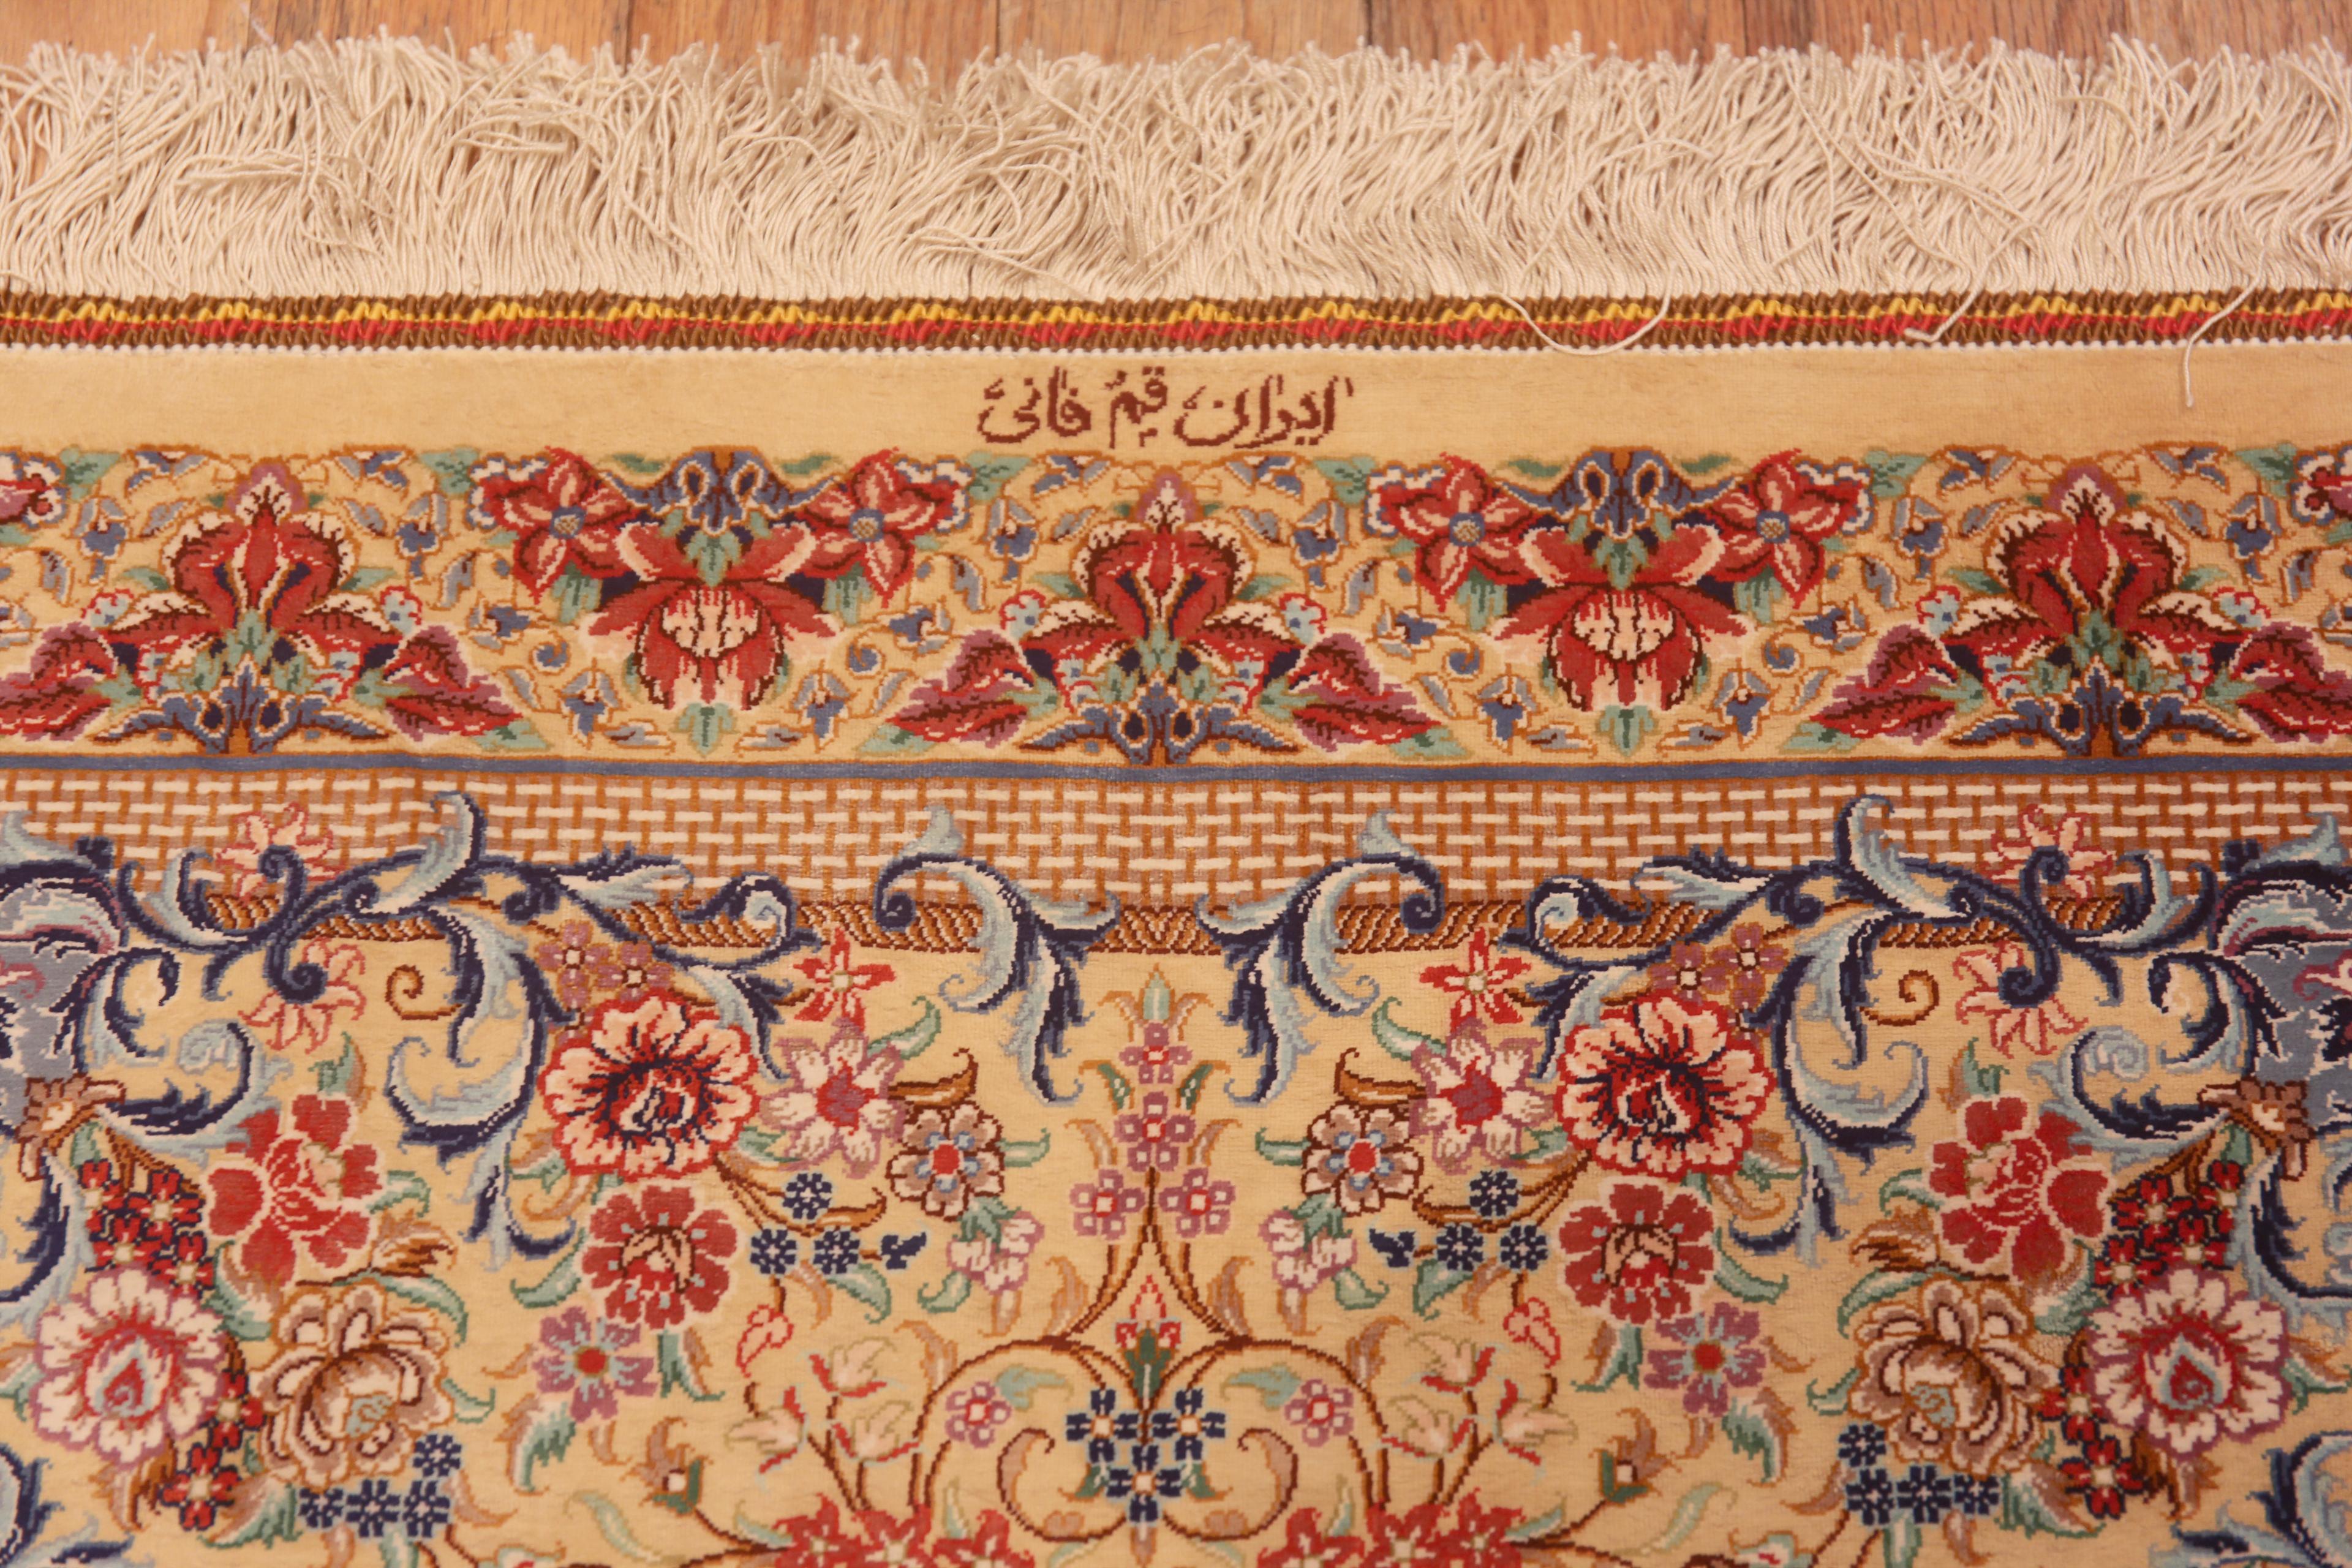 Hand-Knotted Fine Artistic Small Floral Vintage Luxurious Persian Silk Qum Rug 2'6